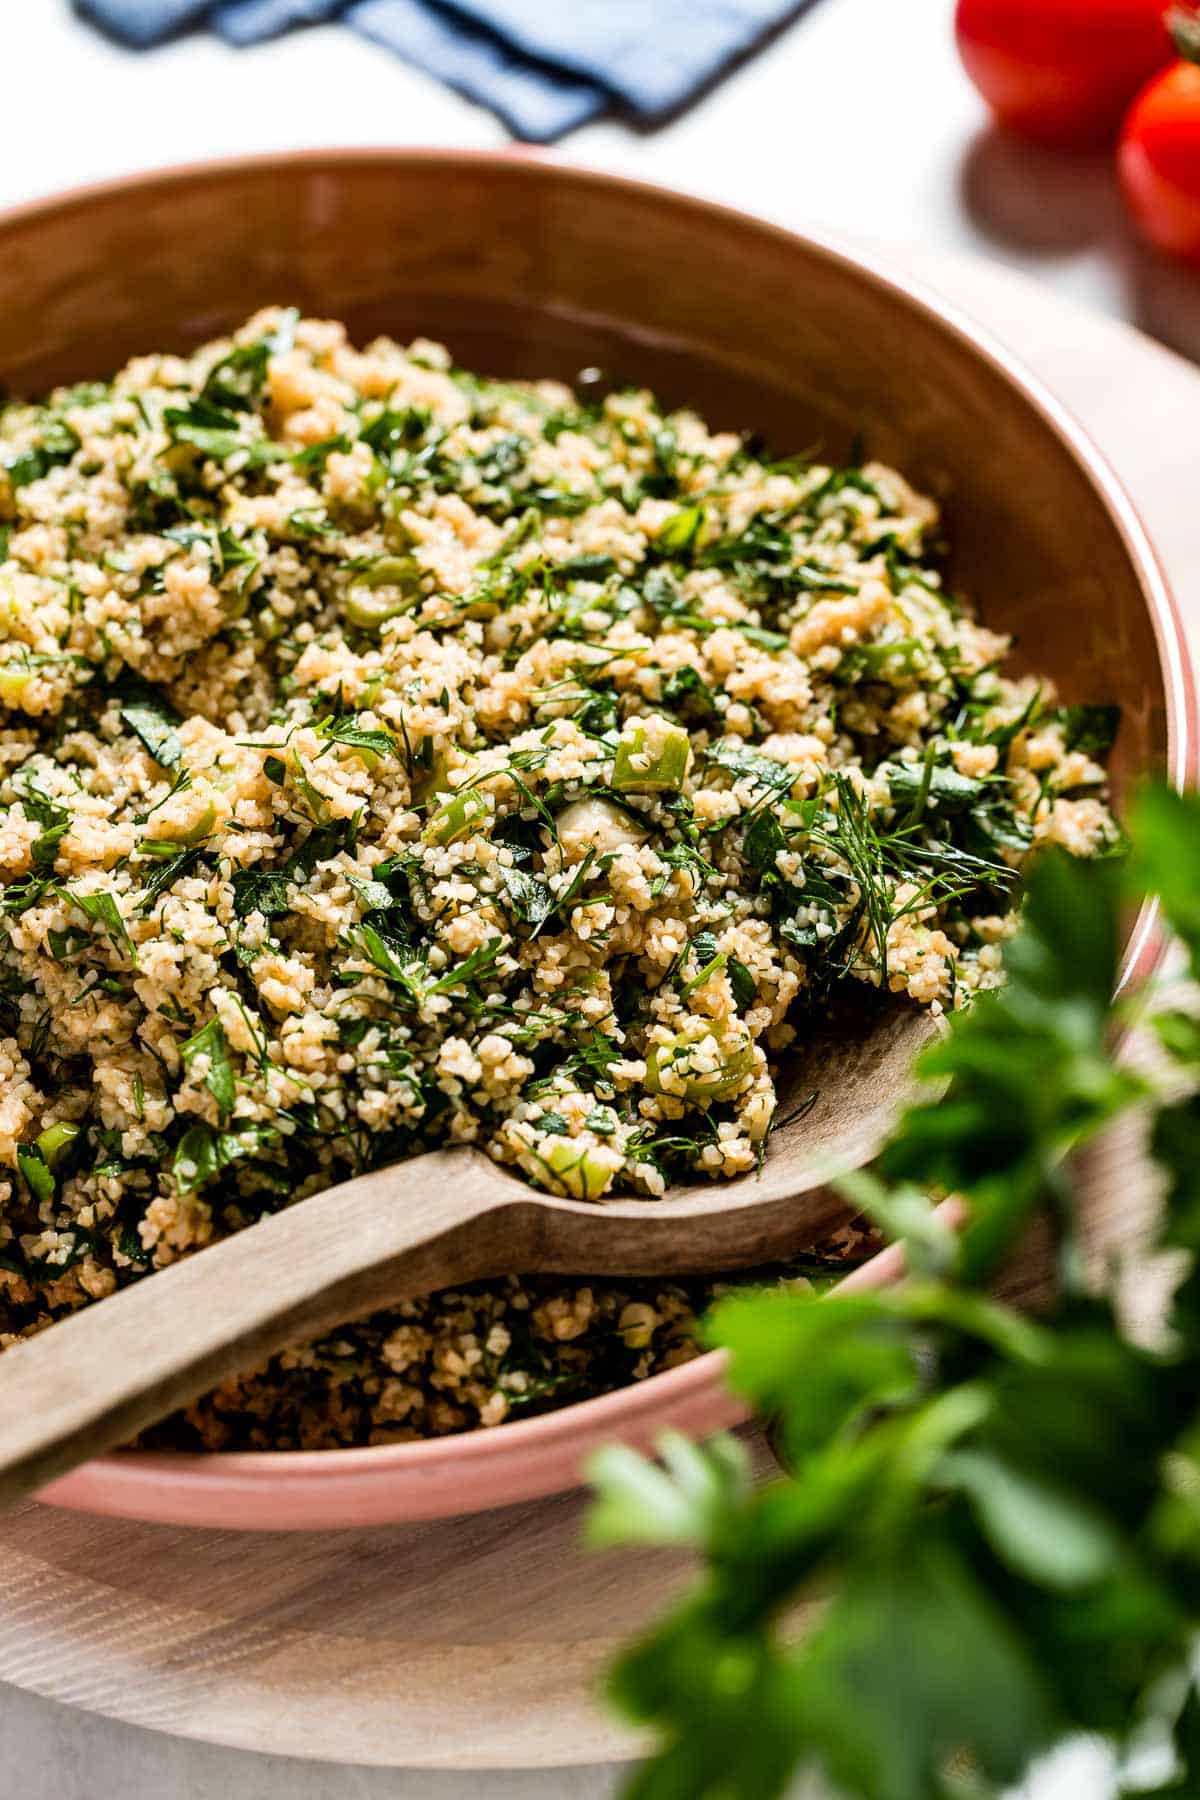 Tabouli salad as one of the spring salad ideas